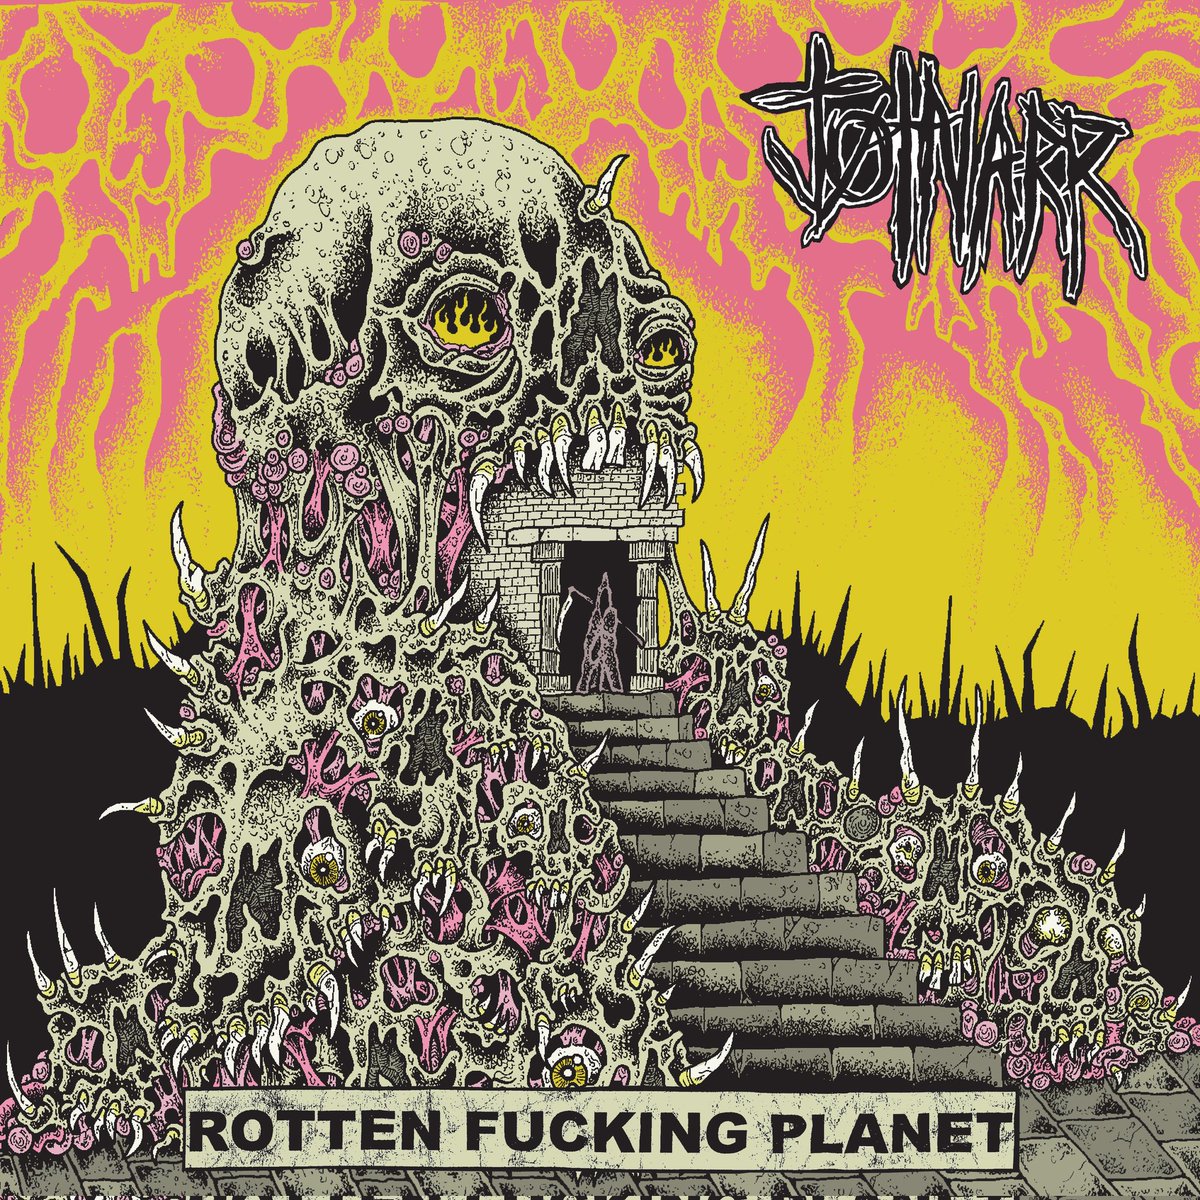 **ROTTEN FUCKING PLANET** Our new EP is now available to download (name your price) from our bandcamp page. You can also listen via Spotify, Apple Music etc. Tracks: Celestial Neuralgia Retching Norwegian Wood Shiteater Nuclear Hornet All the love, Chris, Simon & Chris Ø